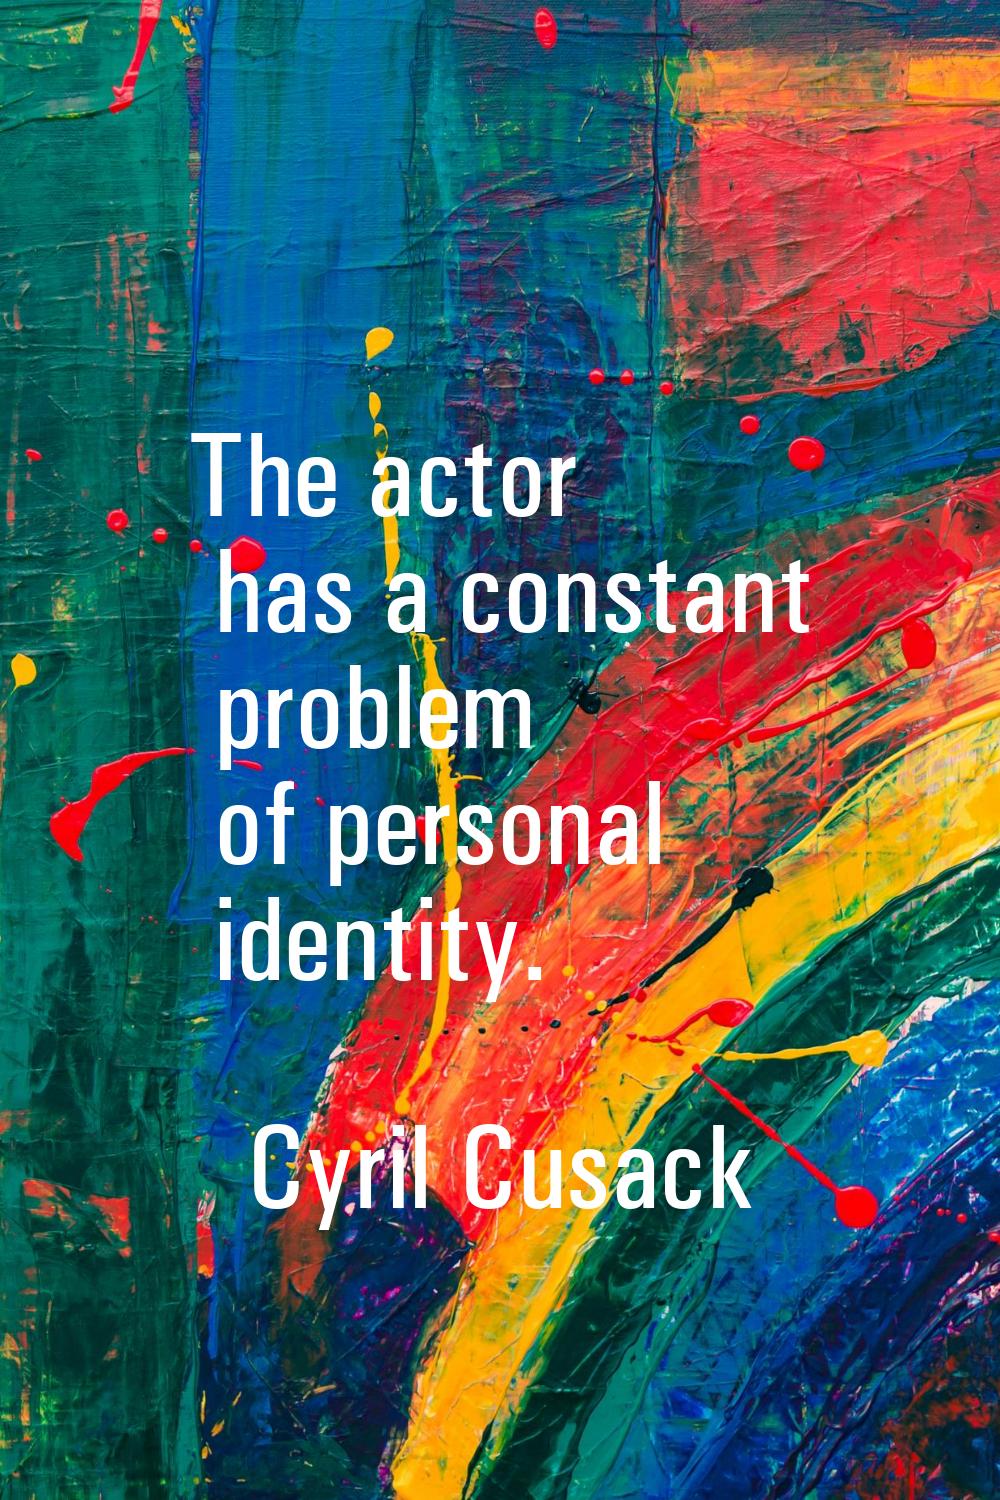 The actor has a constant problem of personal identity.